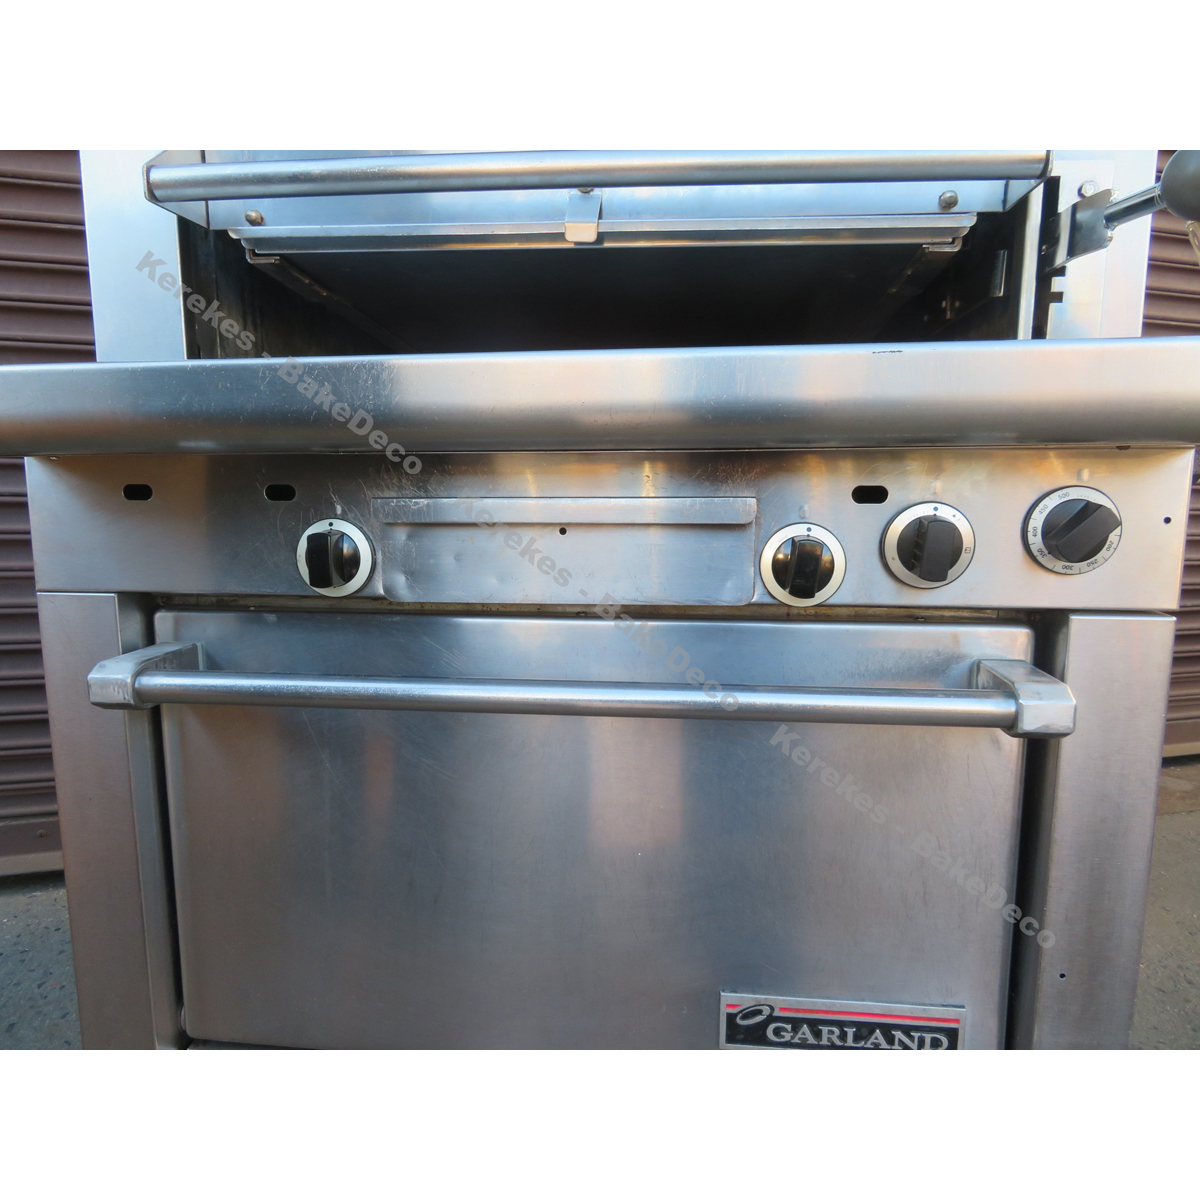 Garland M60XR Natural Gas Broiler With Oven, Used Good Condition image 5